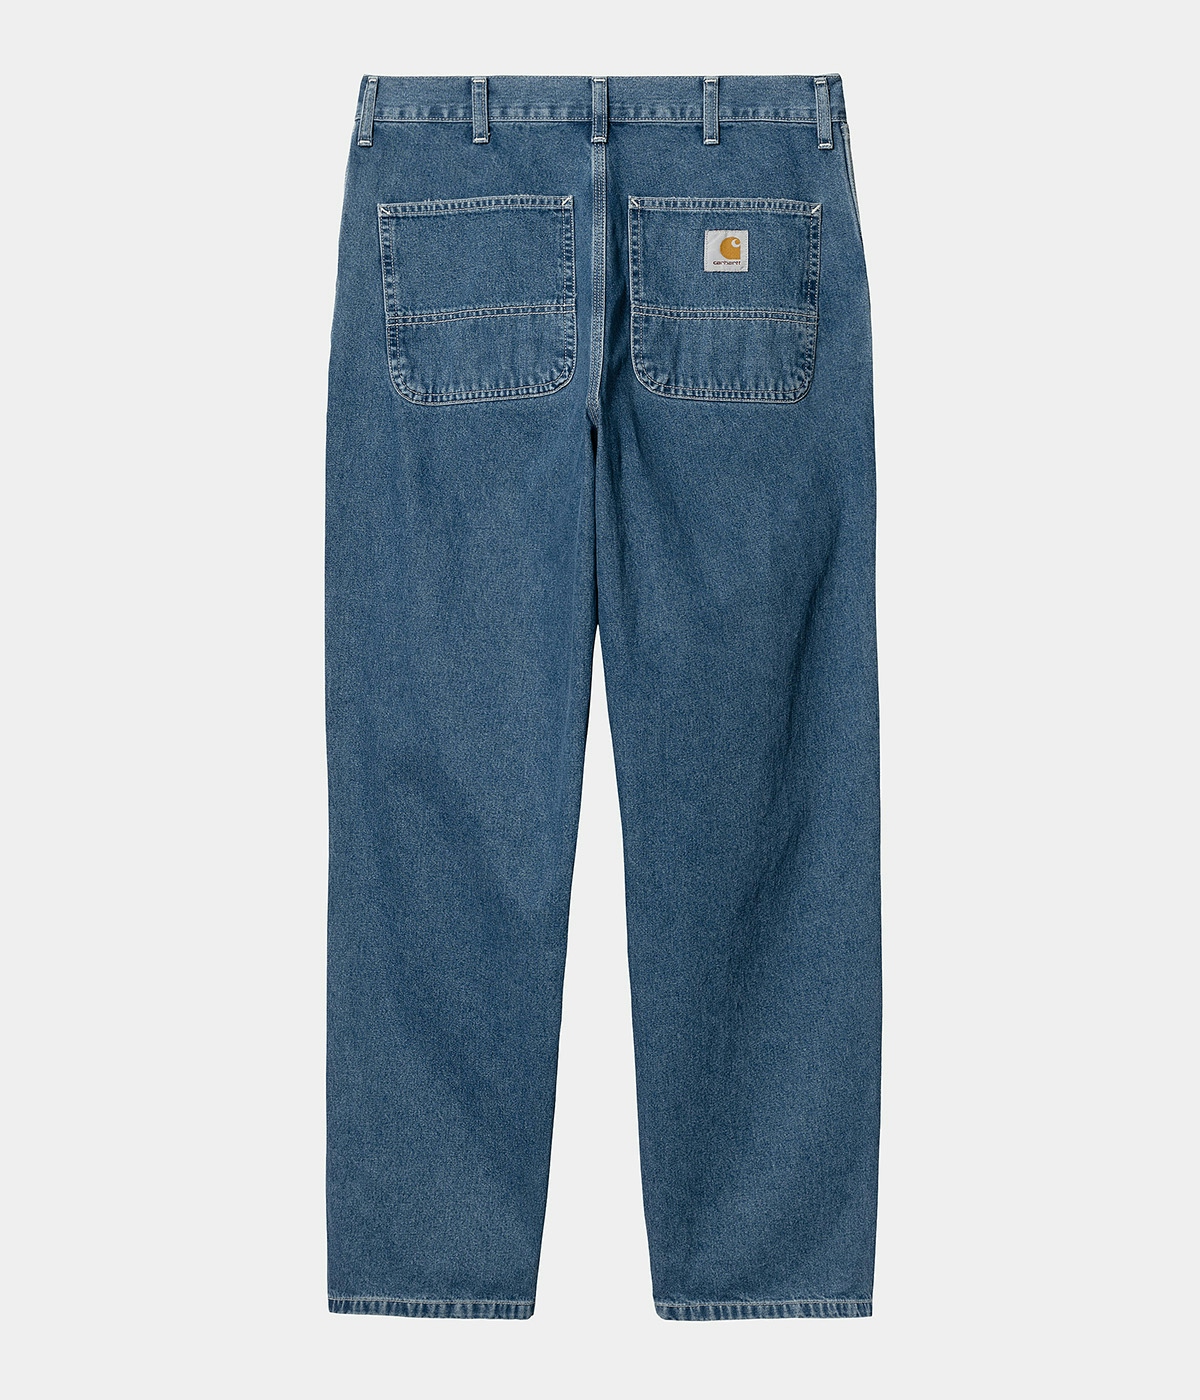 Carhartt Pant Simple Blue/Stone washed 4